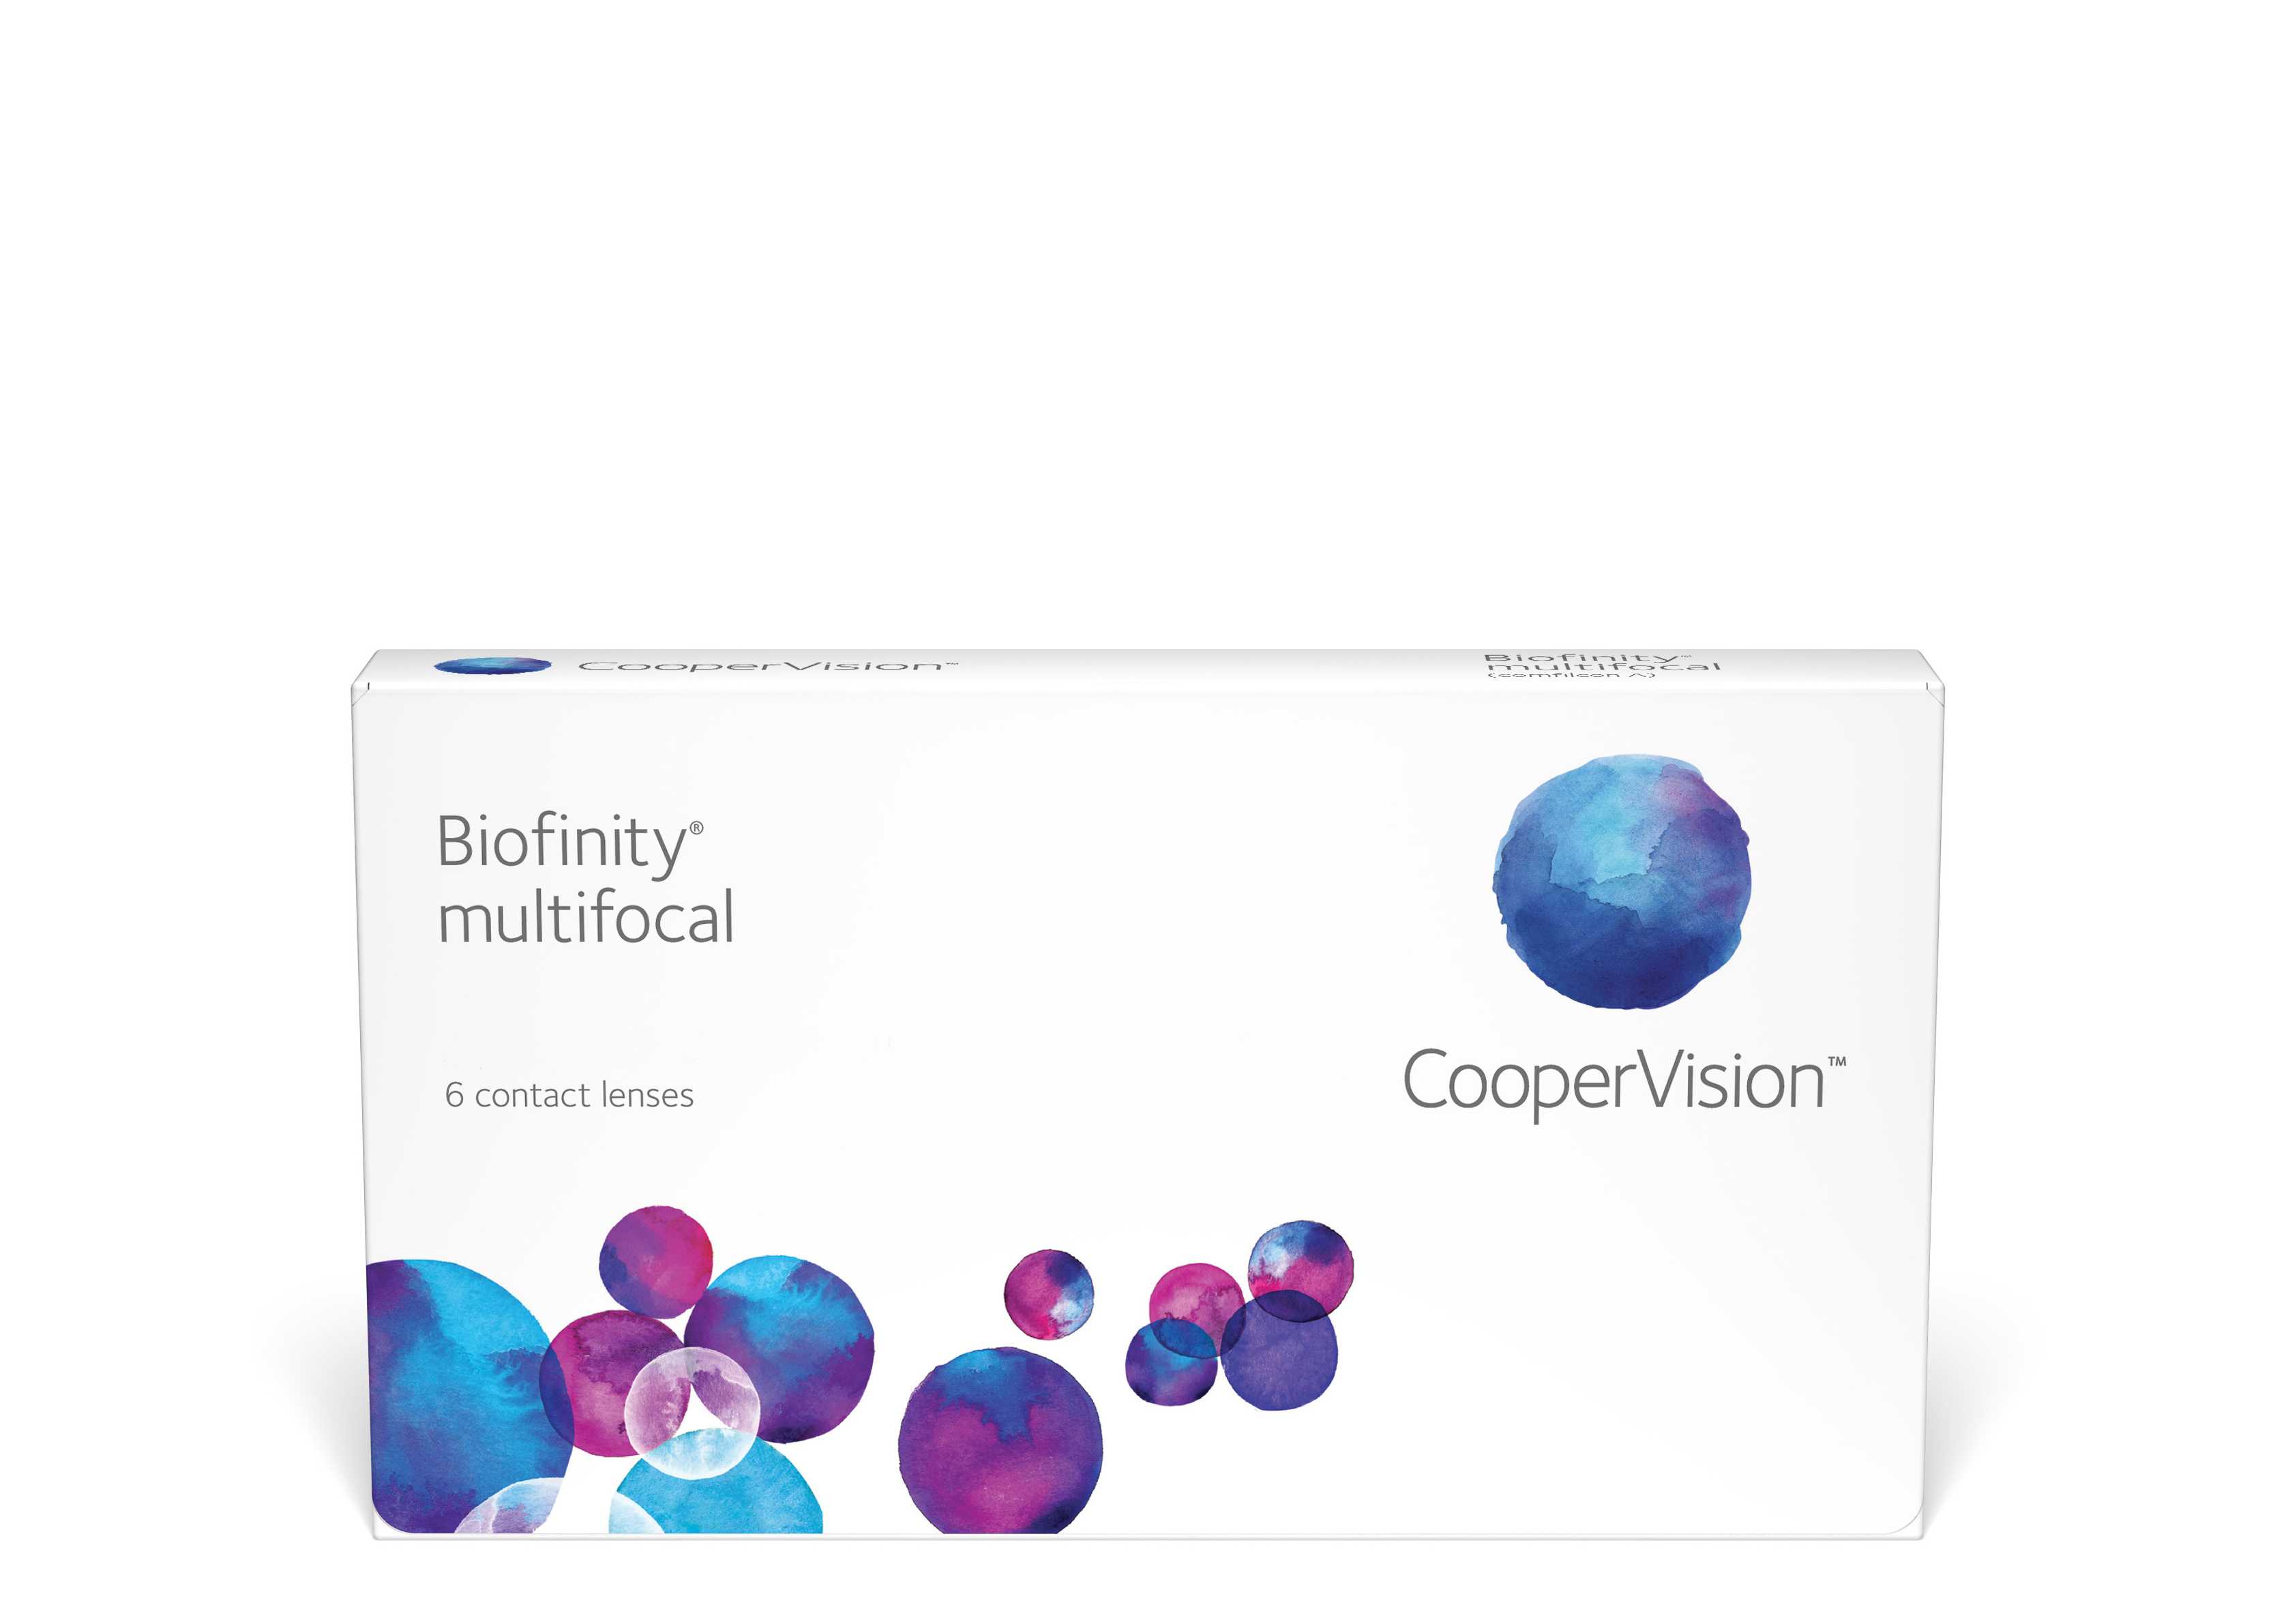  BIOFINITY MULTIFOCAL  COOPERVISION